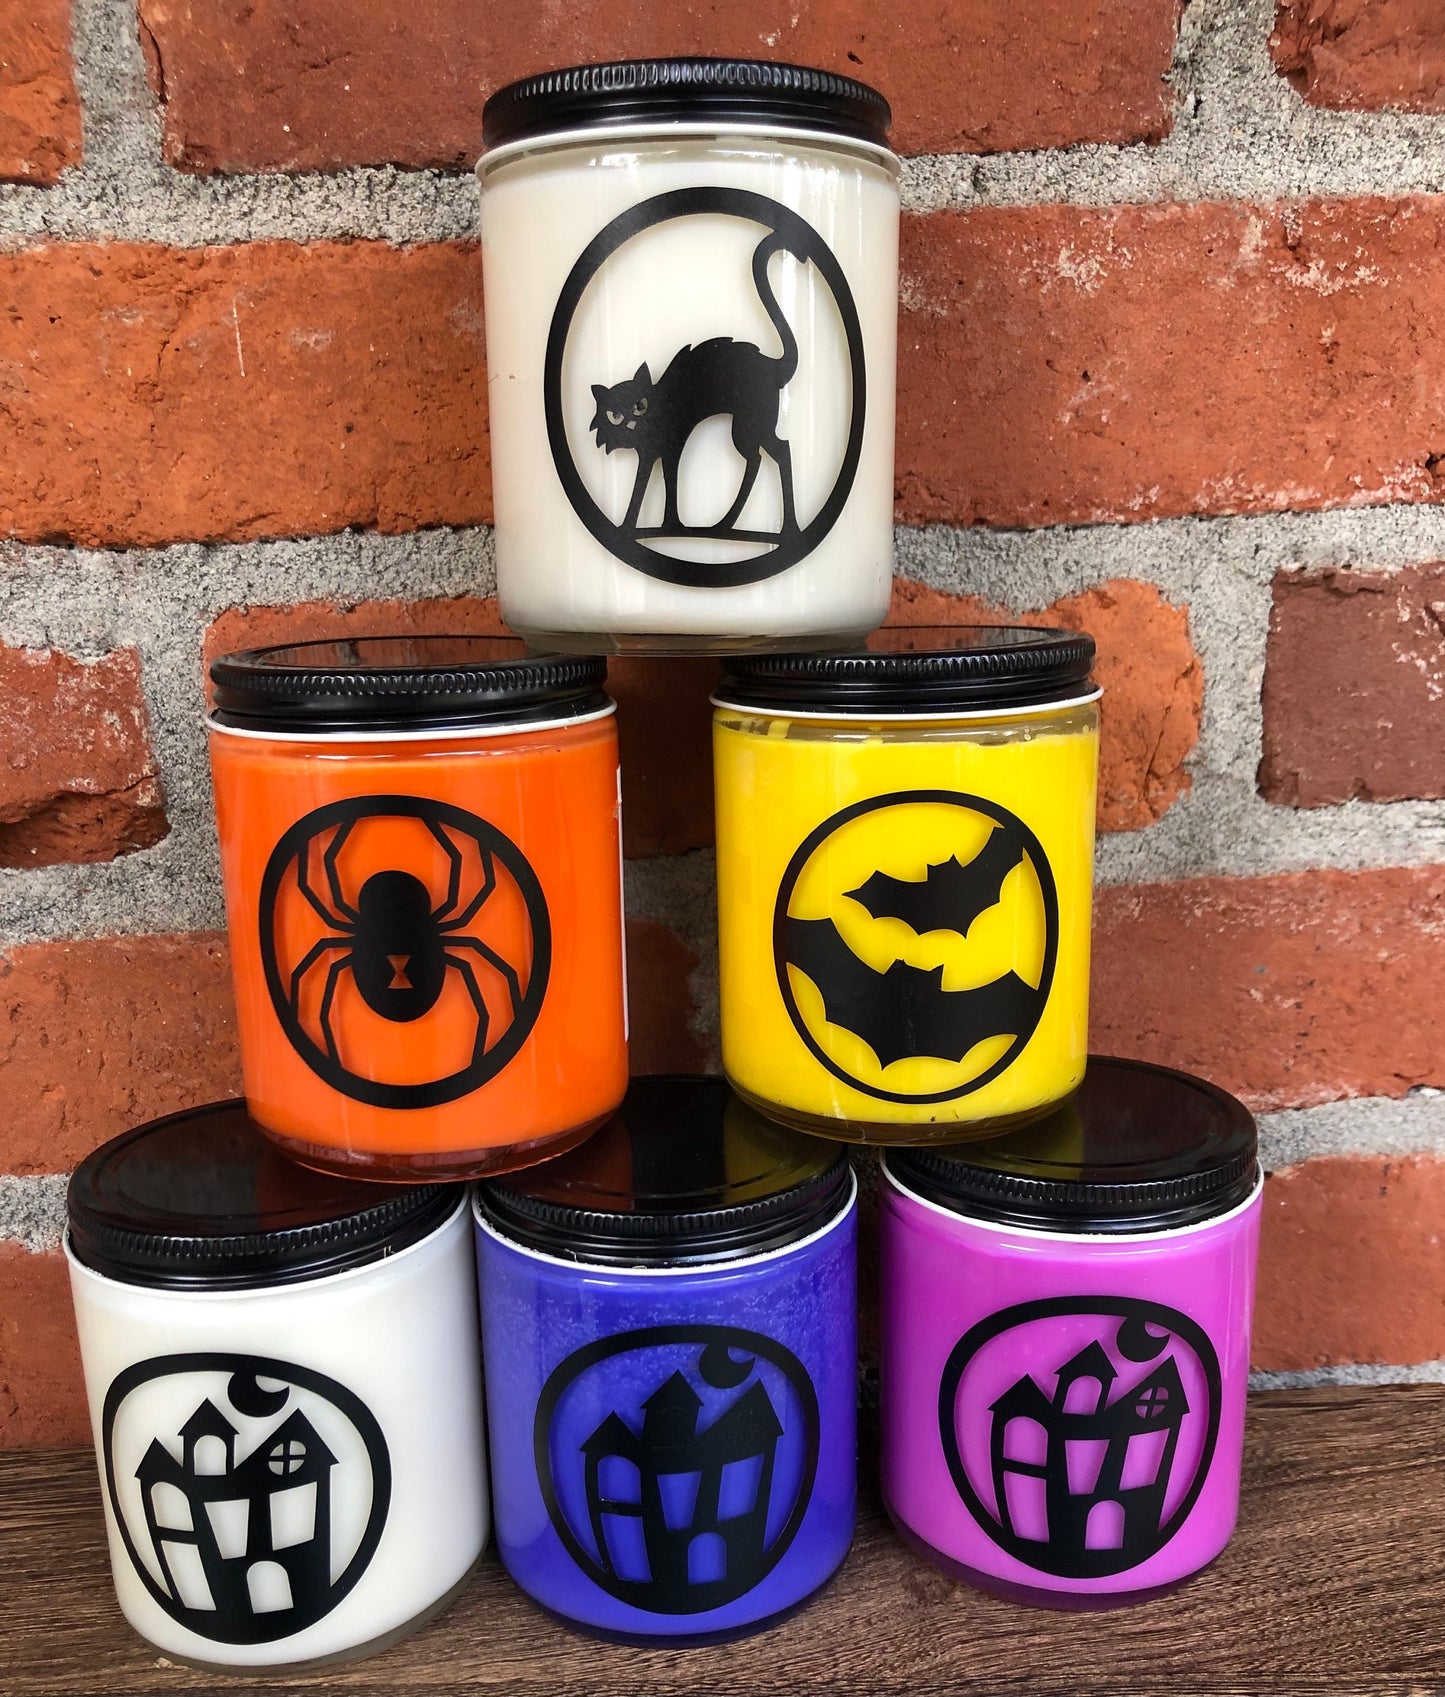 PDX Flower Power " Bat Candle" soy halloween candle